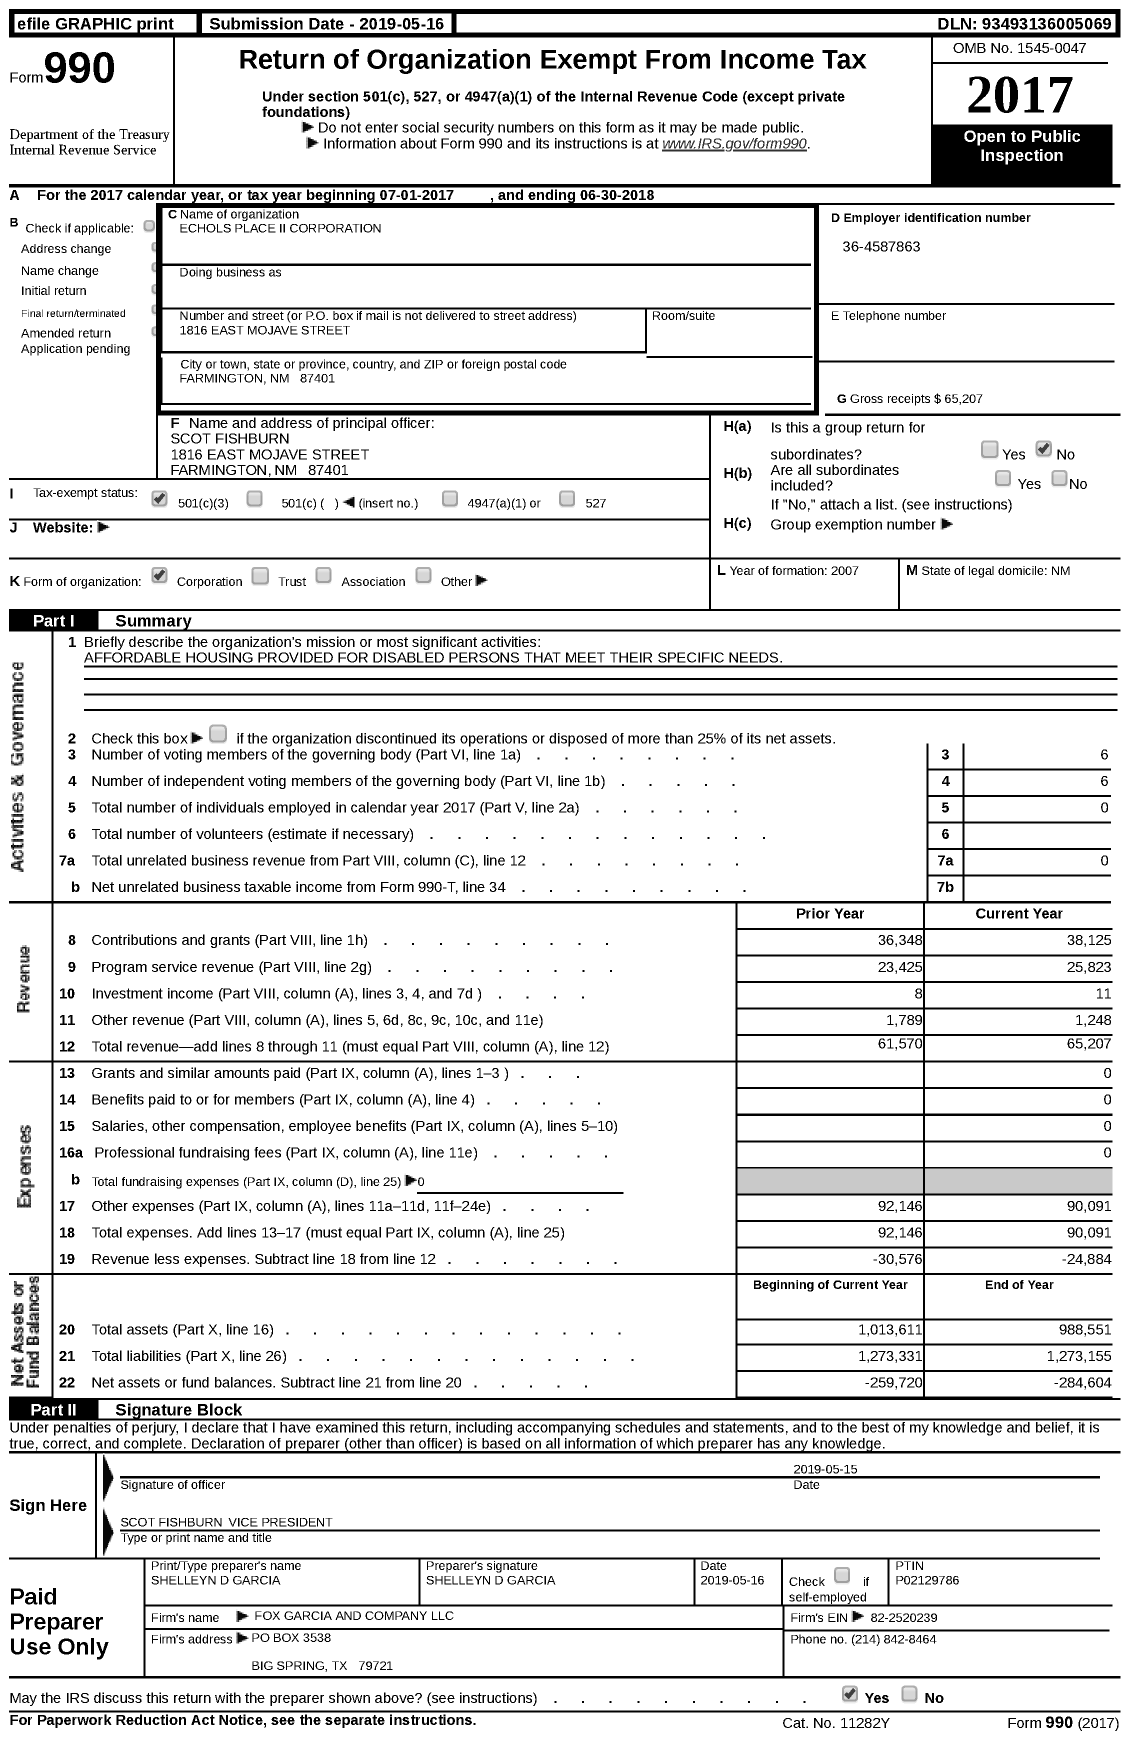 Image of first page of 2017 Form 990 for Echols Place Ii Corporation